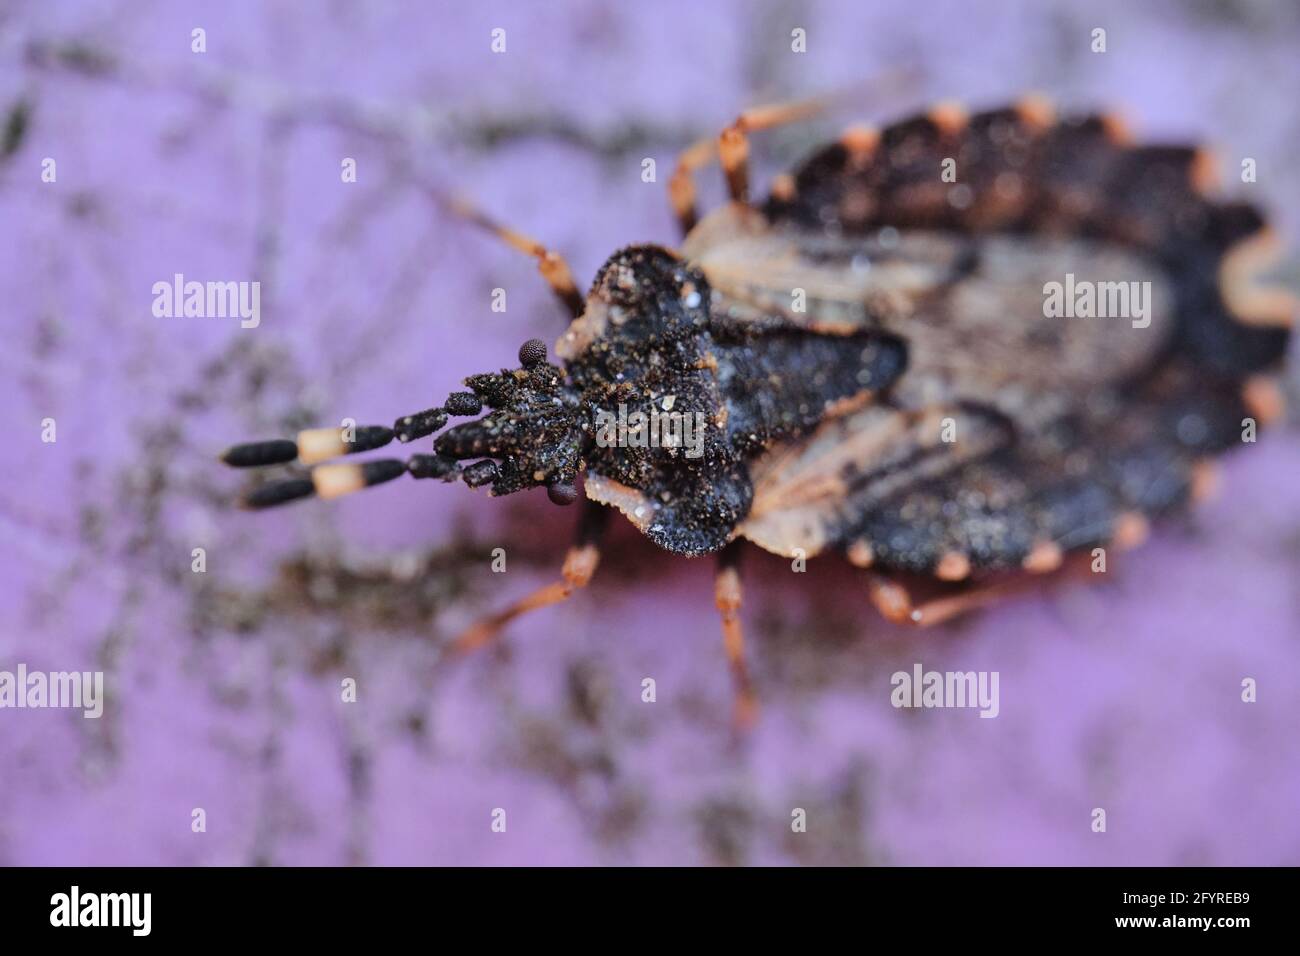 Closeup of an aradus truncatus on a rough surface with a blurry background Stock Photo